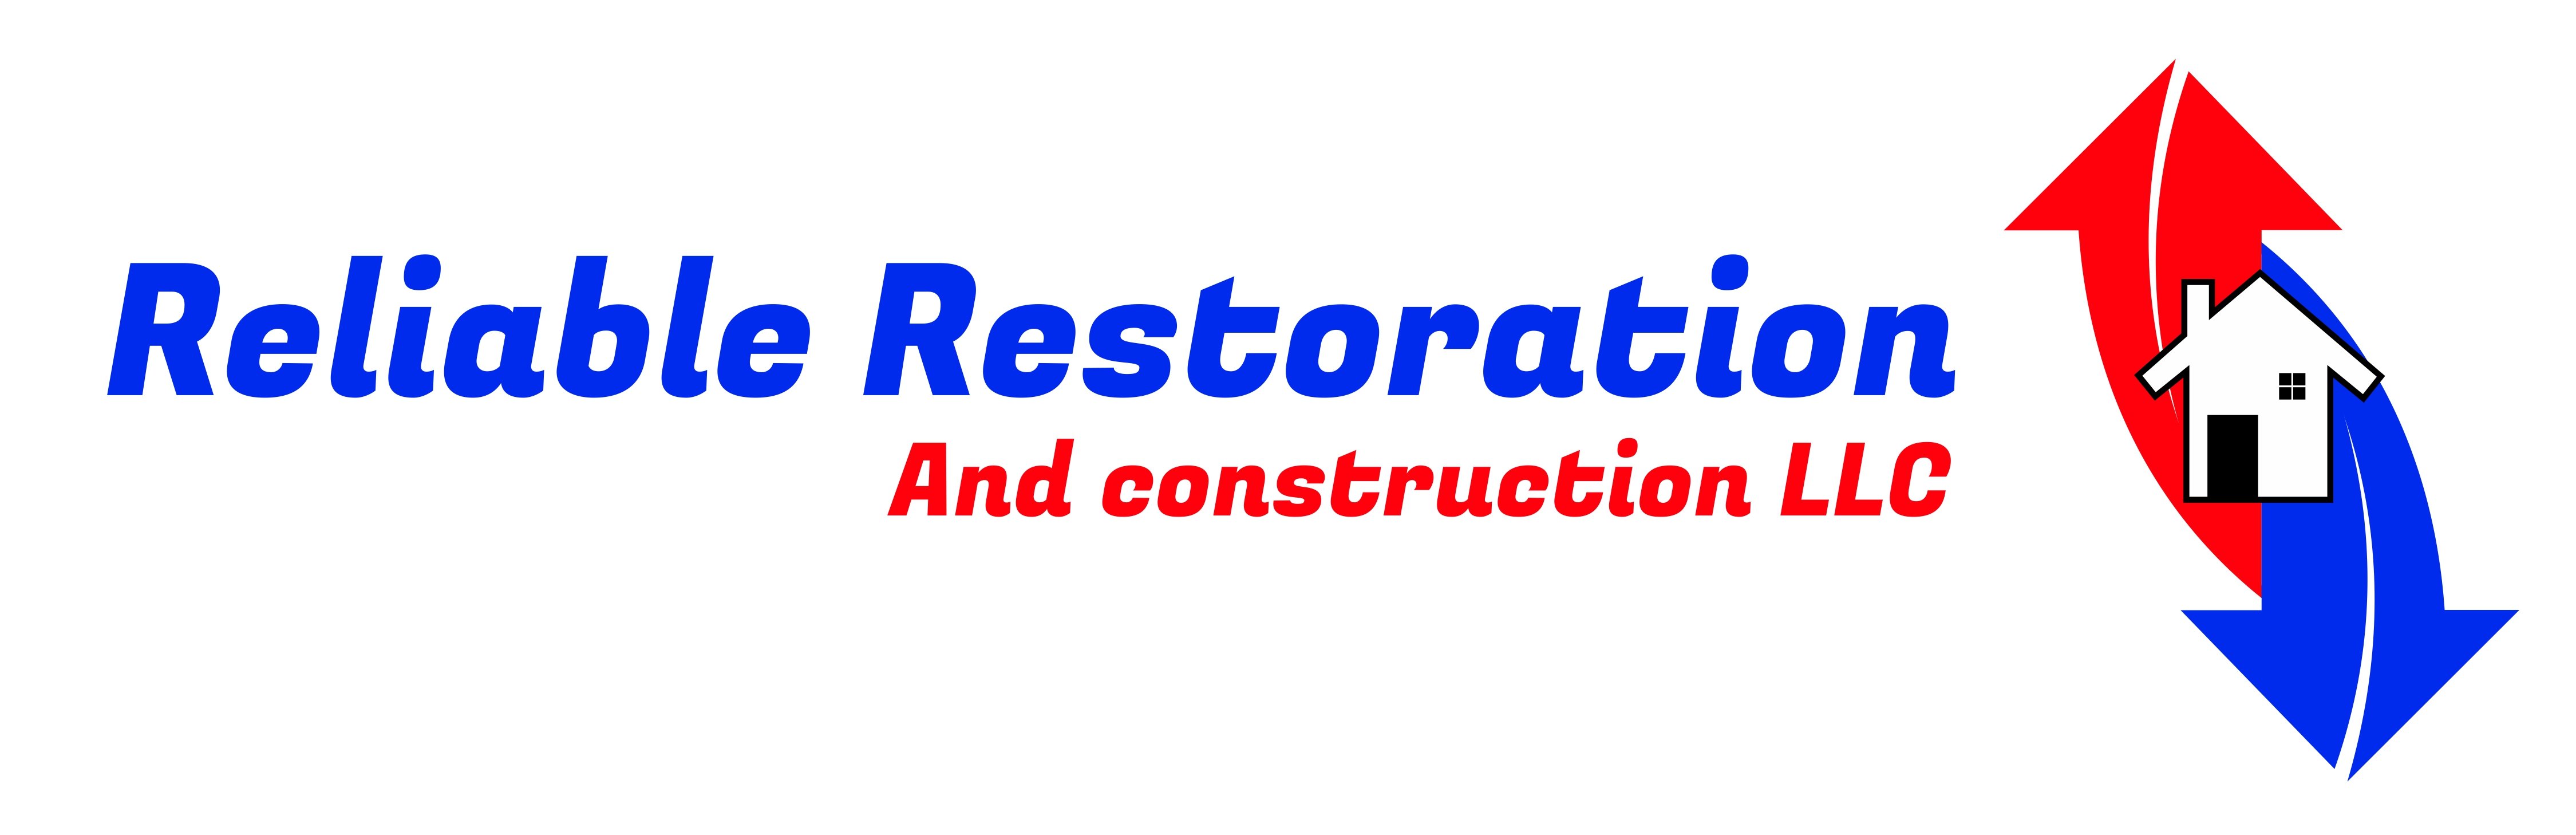 Reliable Restoration and Construction Logo